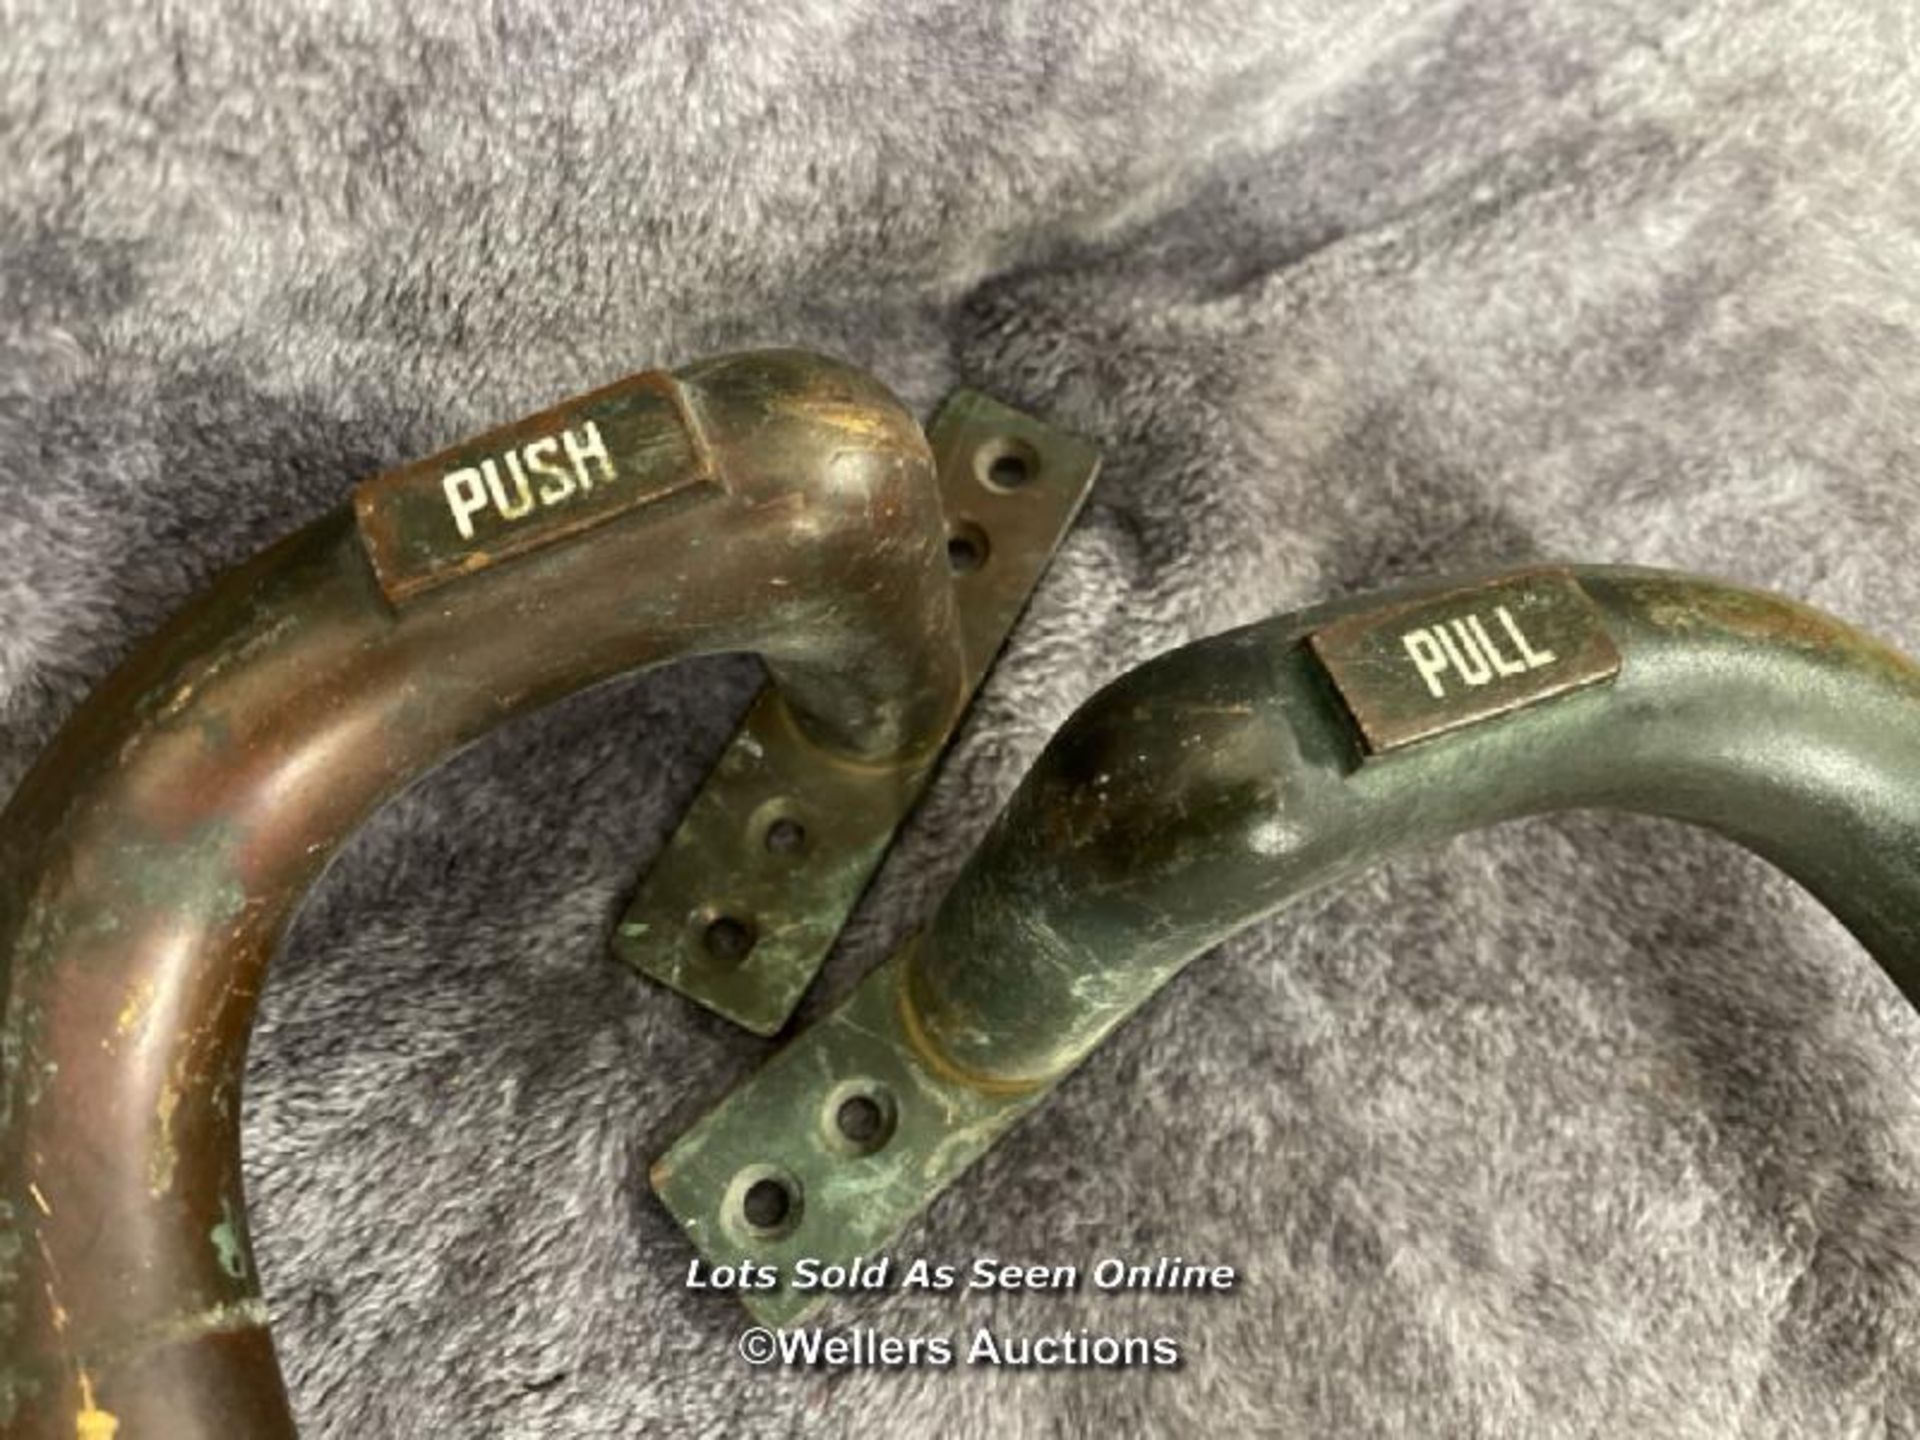 A pair of 'push' and 'pull' iron door handles, each measuring between 76.5cm - 77.5cm long - Image 2 of 3